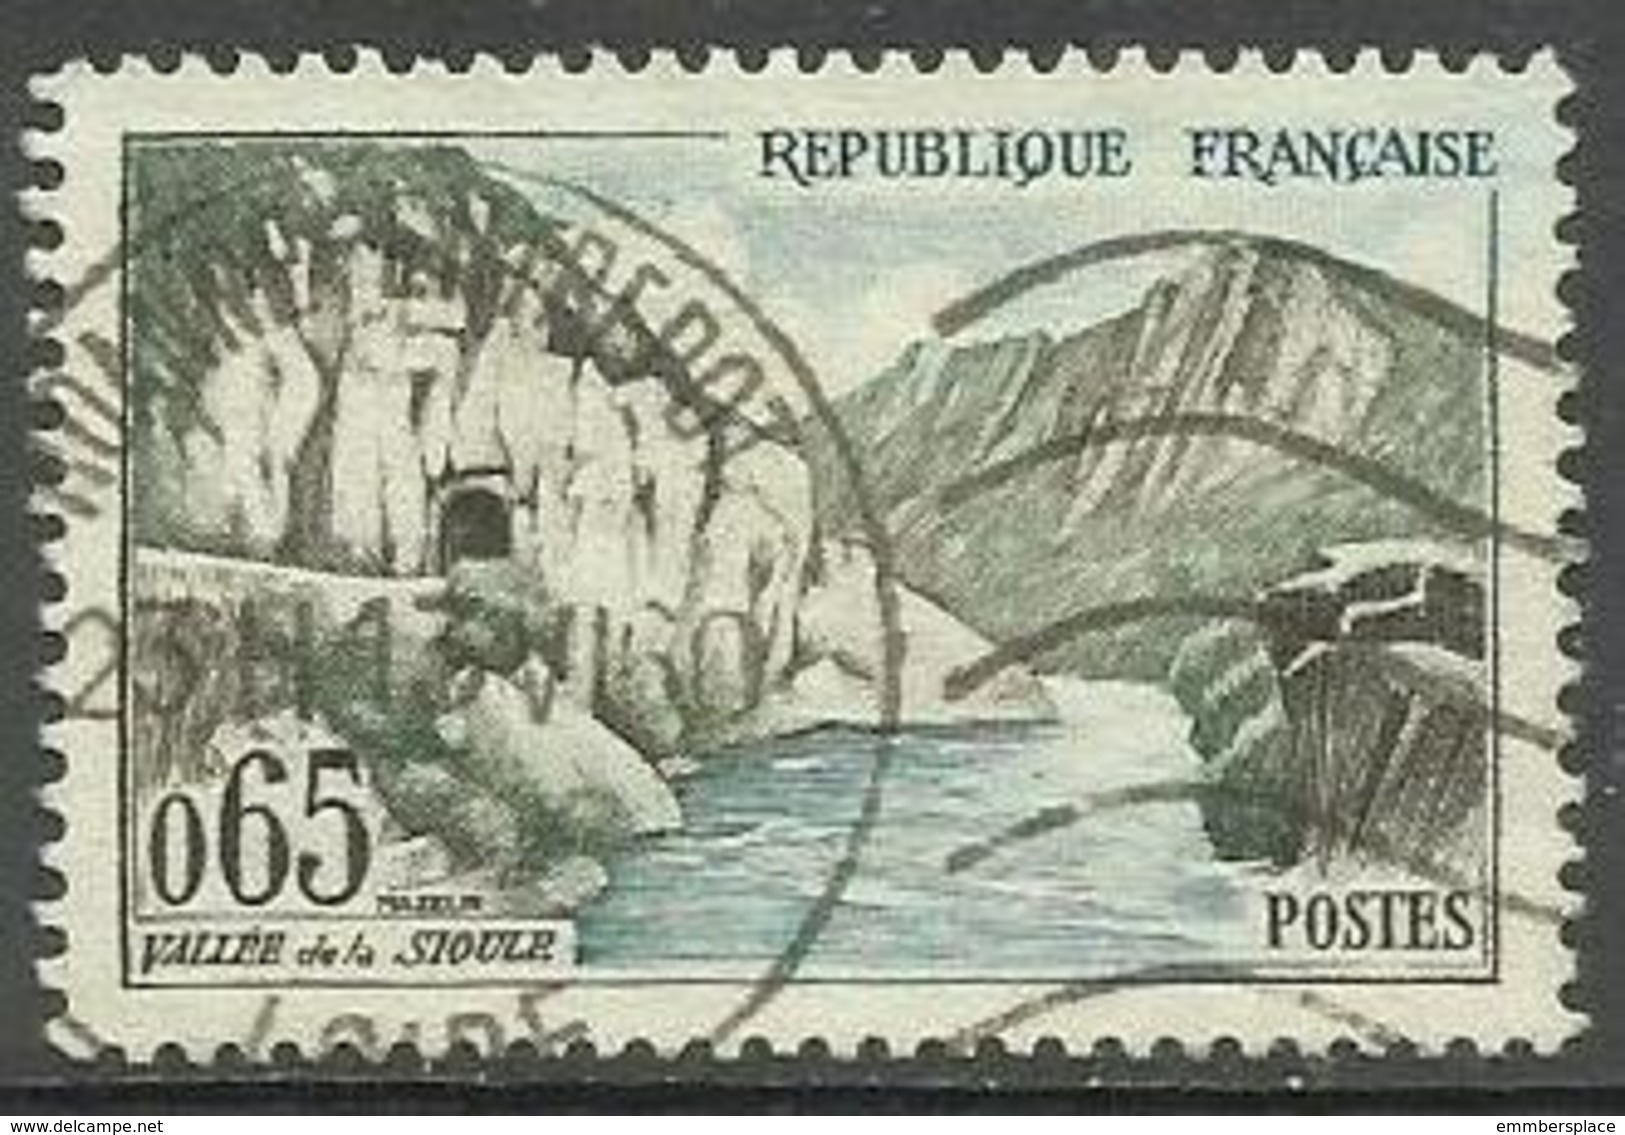 France - 1960 Sioule Valley 65c Used   Sc 947 - Used Stamps